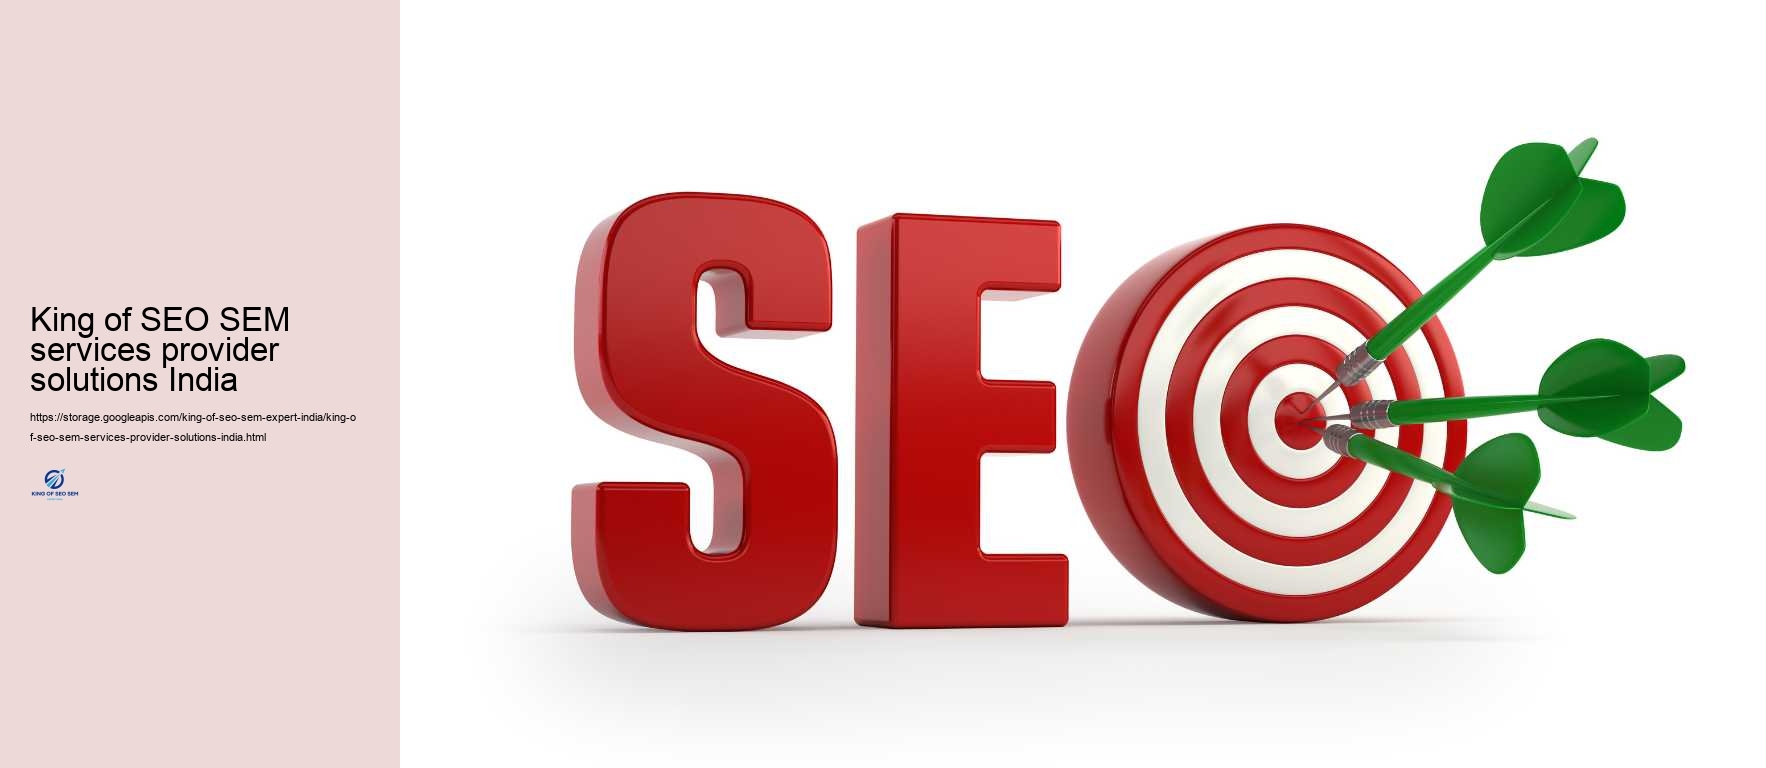 King of SEO SEM services provider solutions India